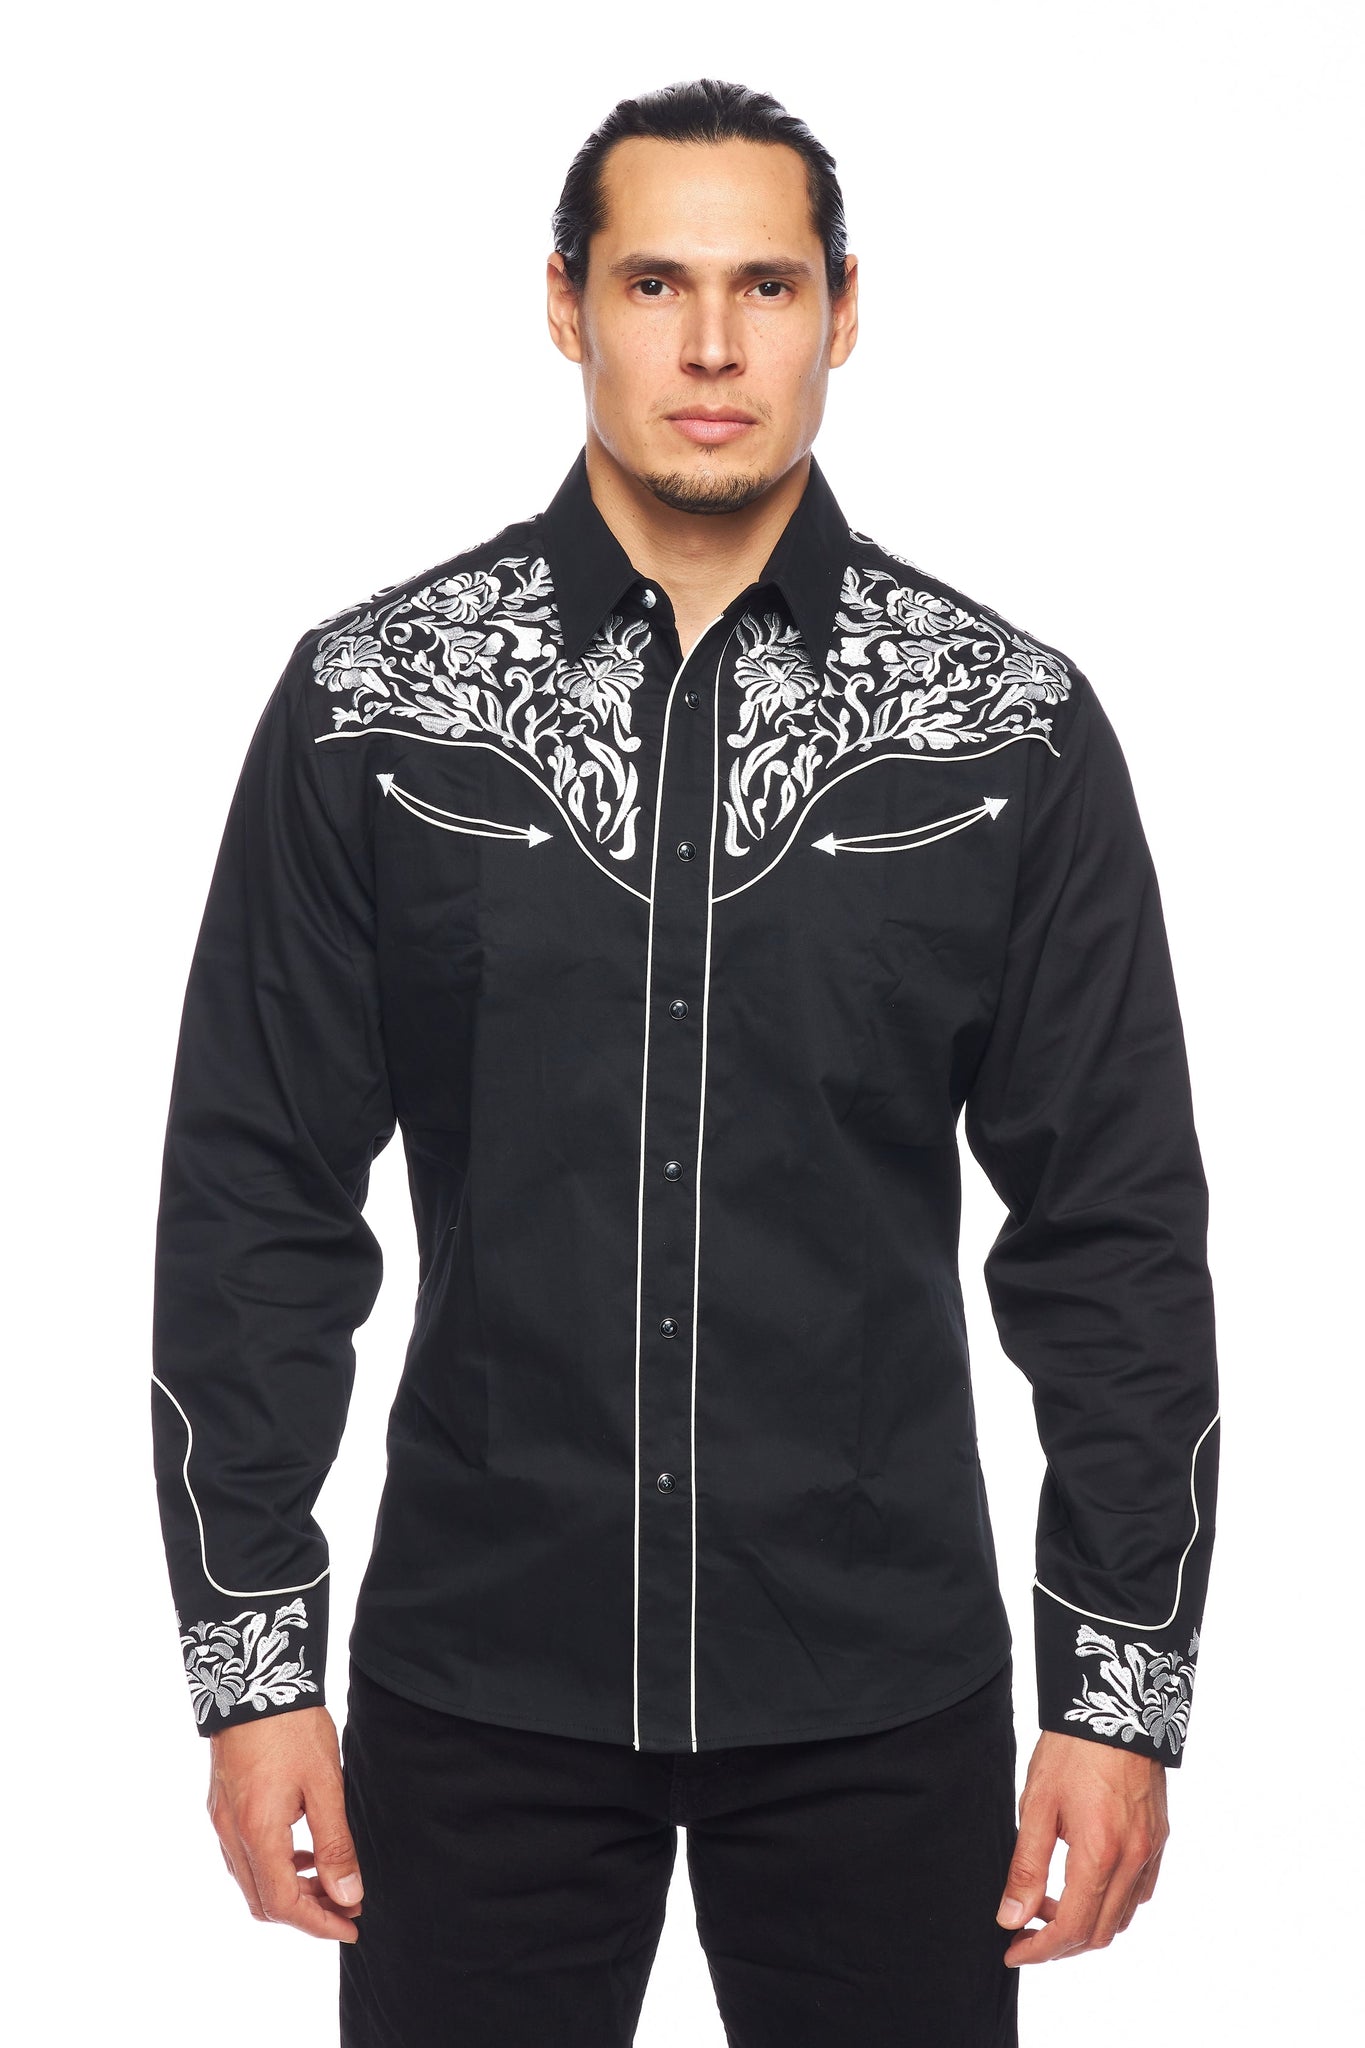 Men's Western Cowboy Embroidery Shirt -PS500L-562